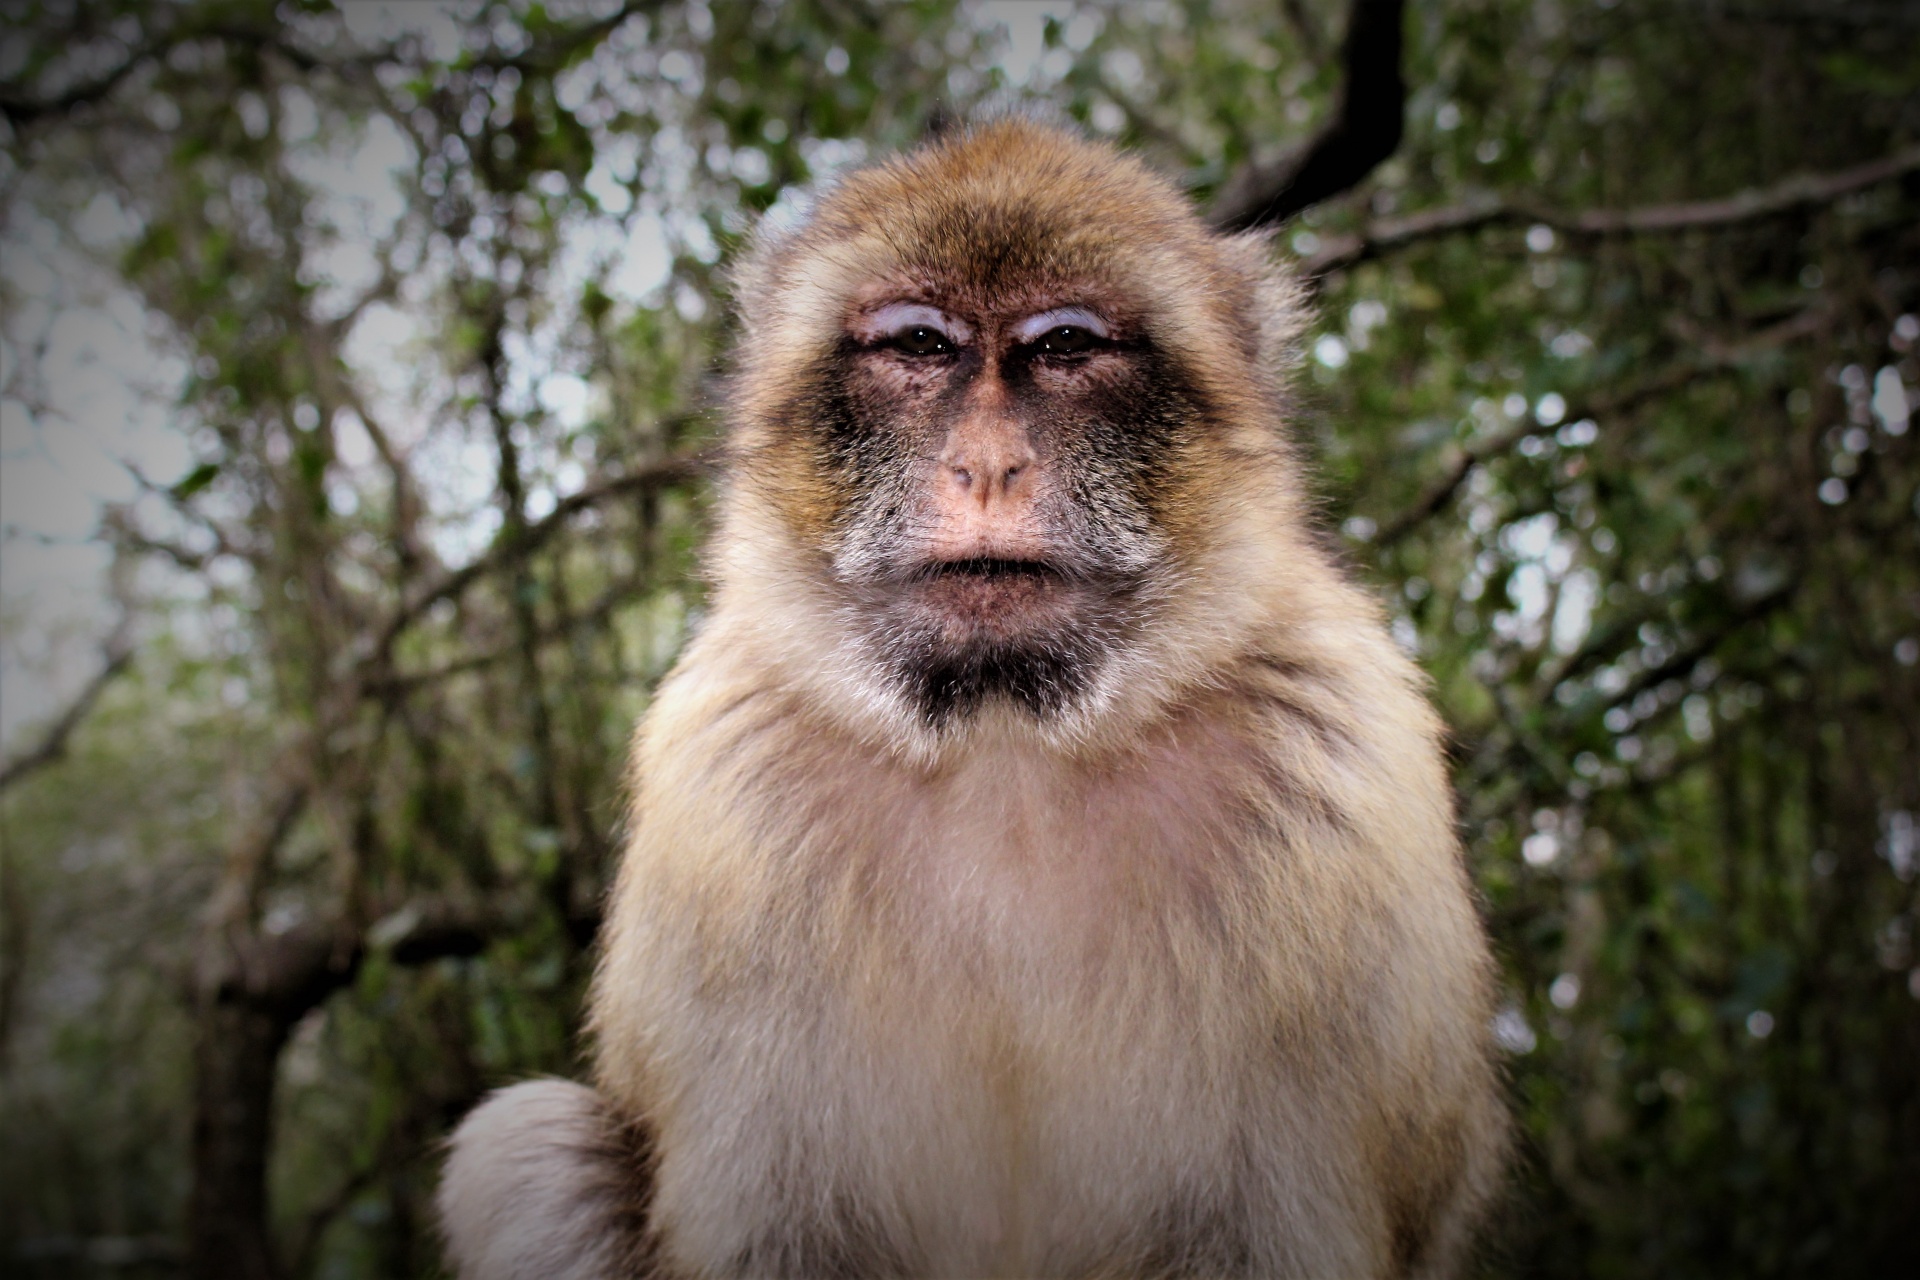 A Barbary ape at the top of the rock of Gibraltar